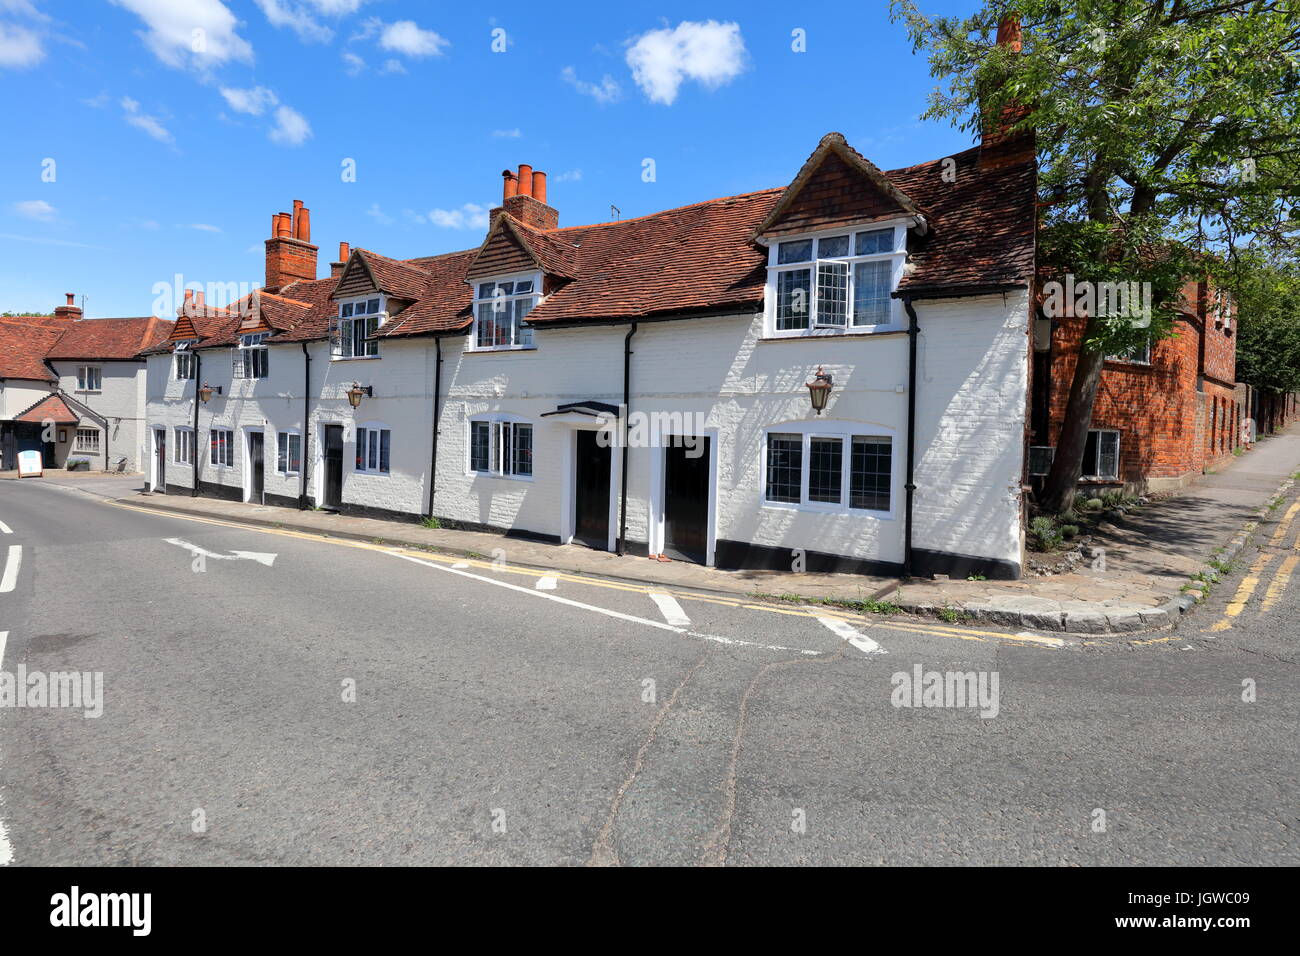 The Little house as it is now known has a row of terraced houses alongside the main road through the village in this quiet village location. Stock Photo